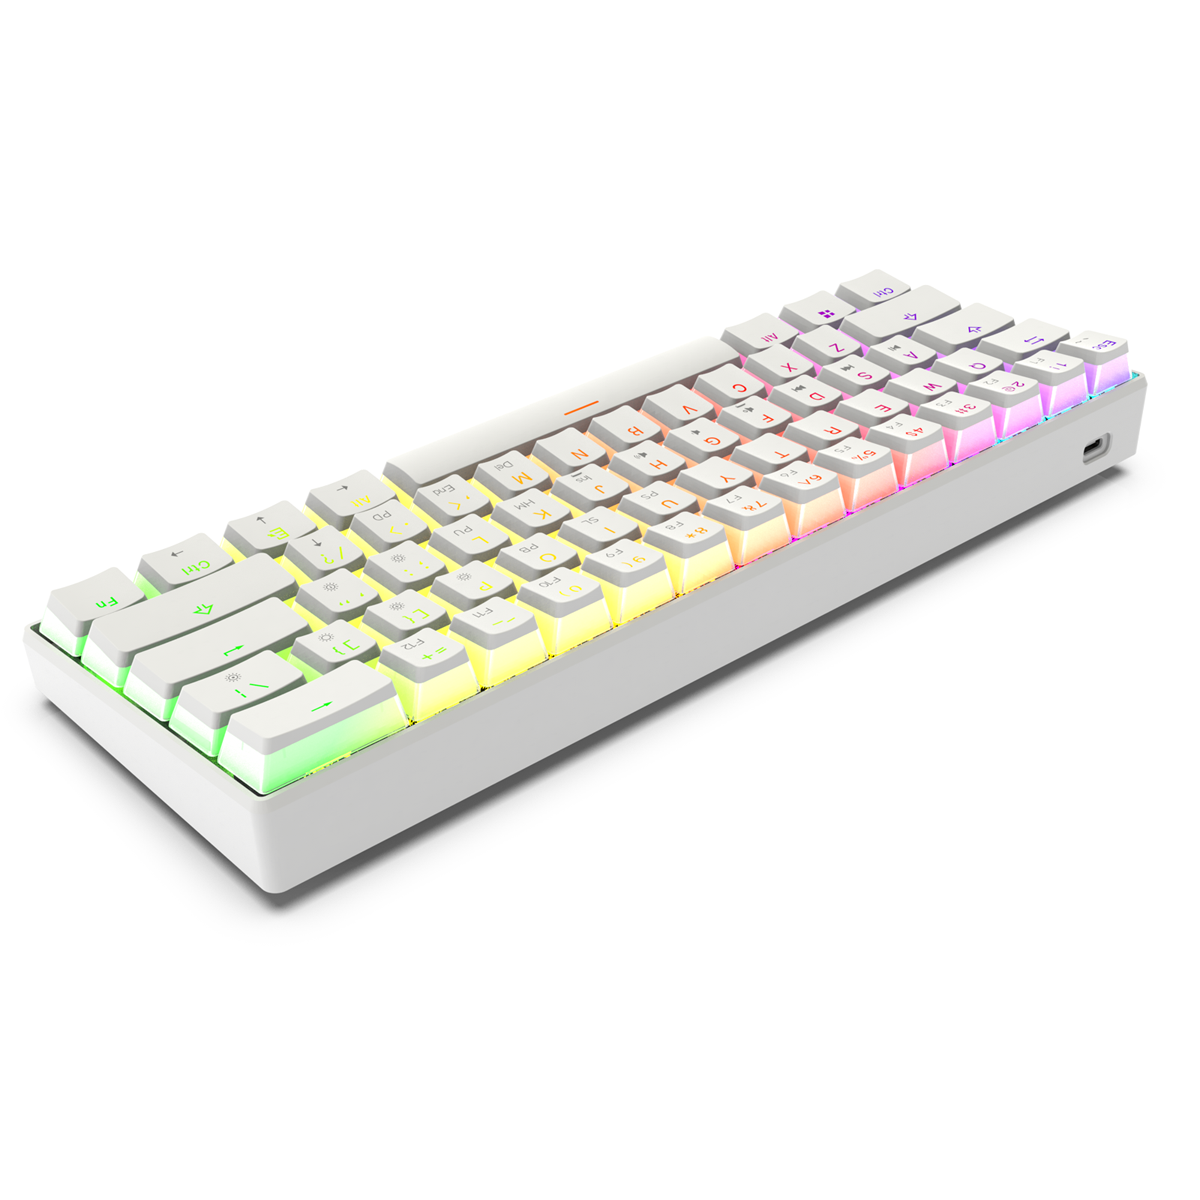 Gamakay MK61 Wired Mechanical Keyboard Gateron Optical Switch Pudding Keycaps RGB 61 Keys Hot Swappable Gaming Keyboard New Version 3